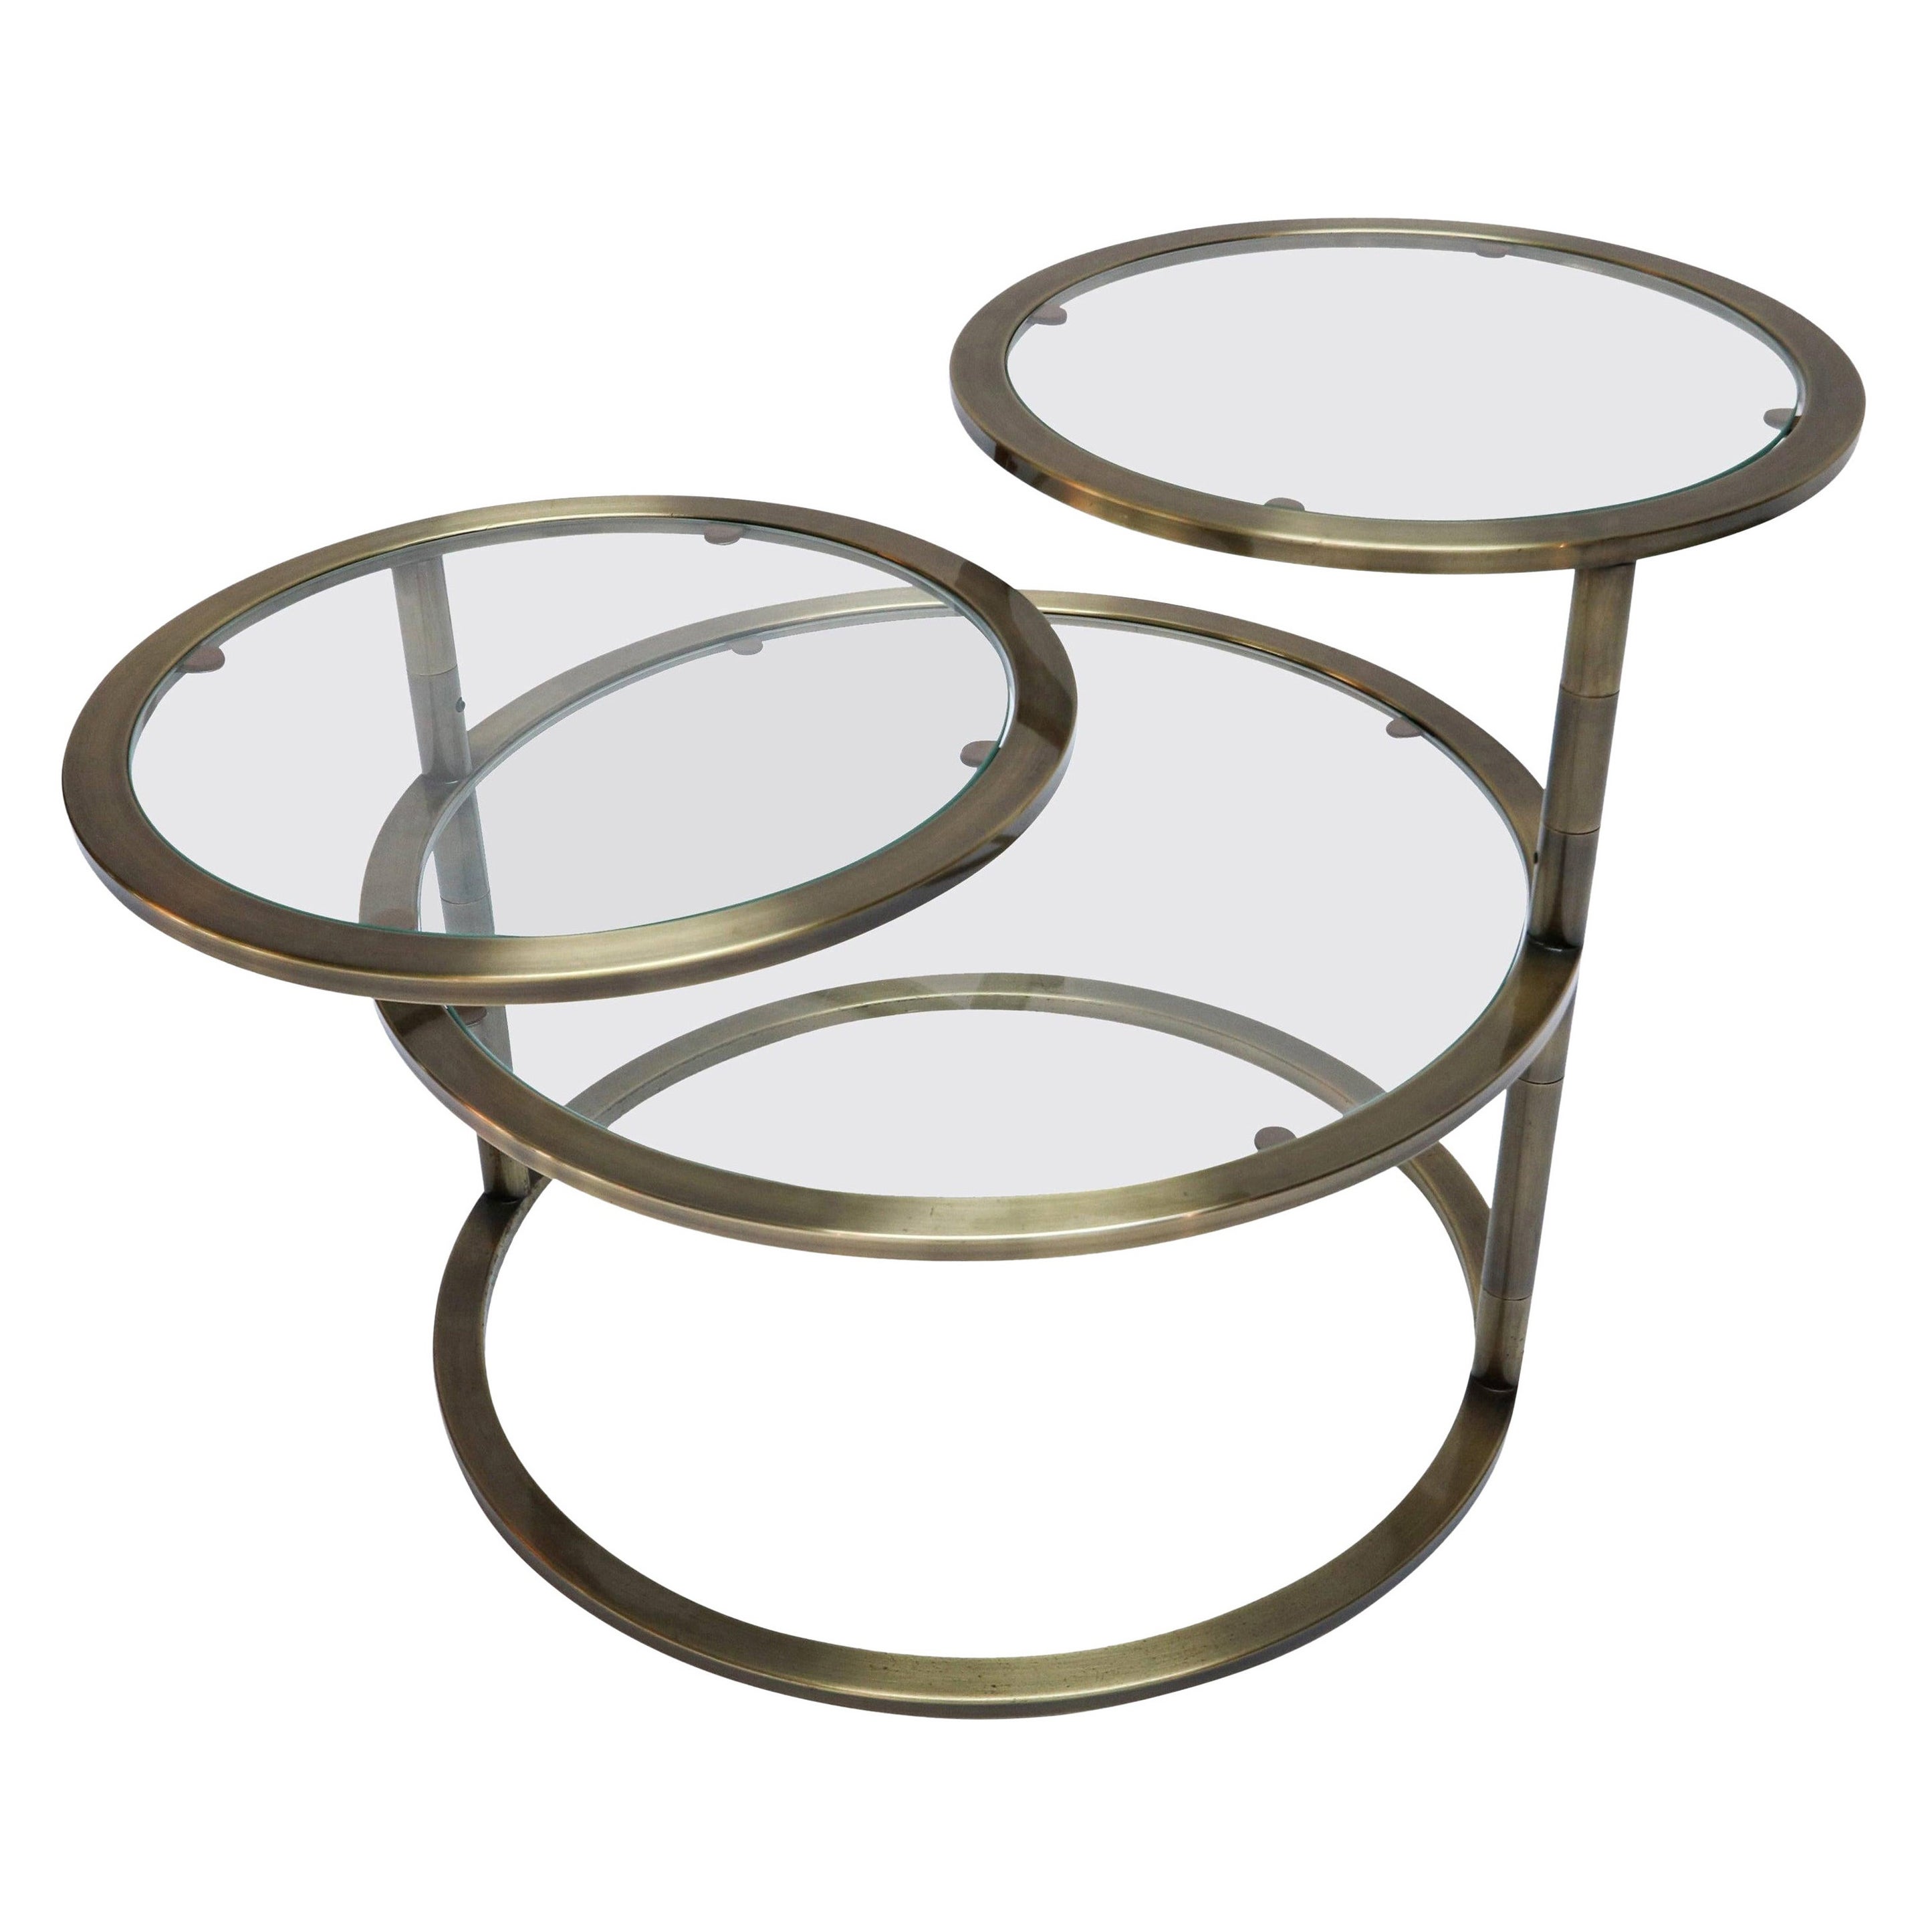 Three-Tiered Brass Coffee / Side Table with Adjustable Round Glass Shelves